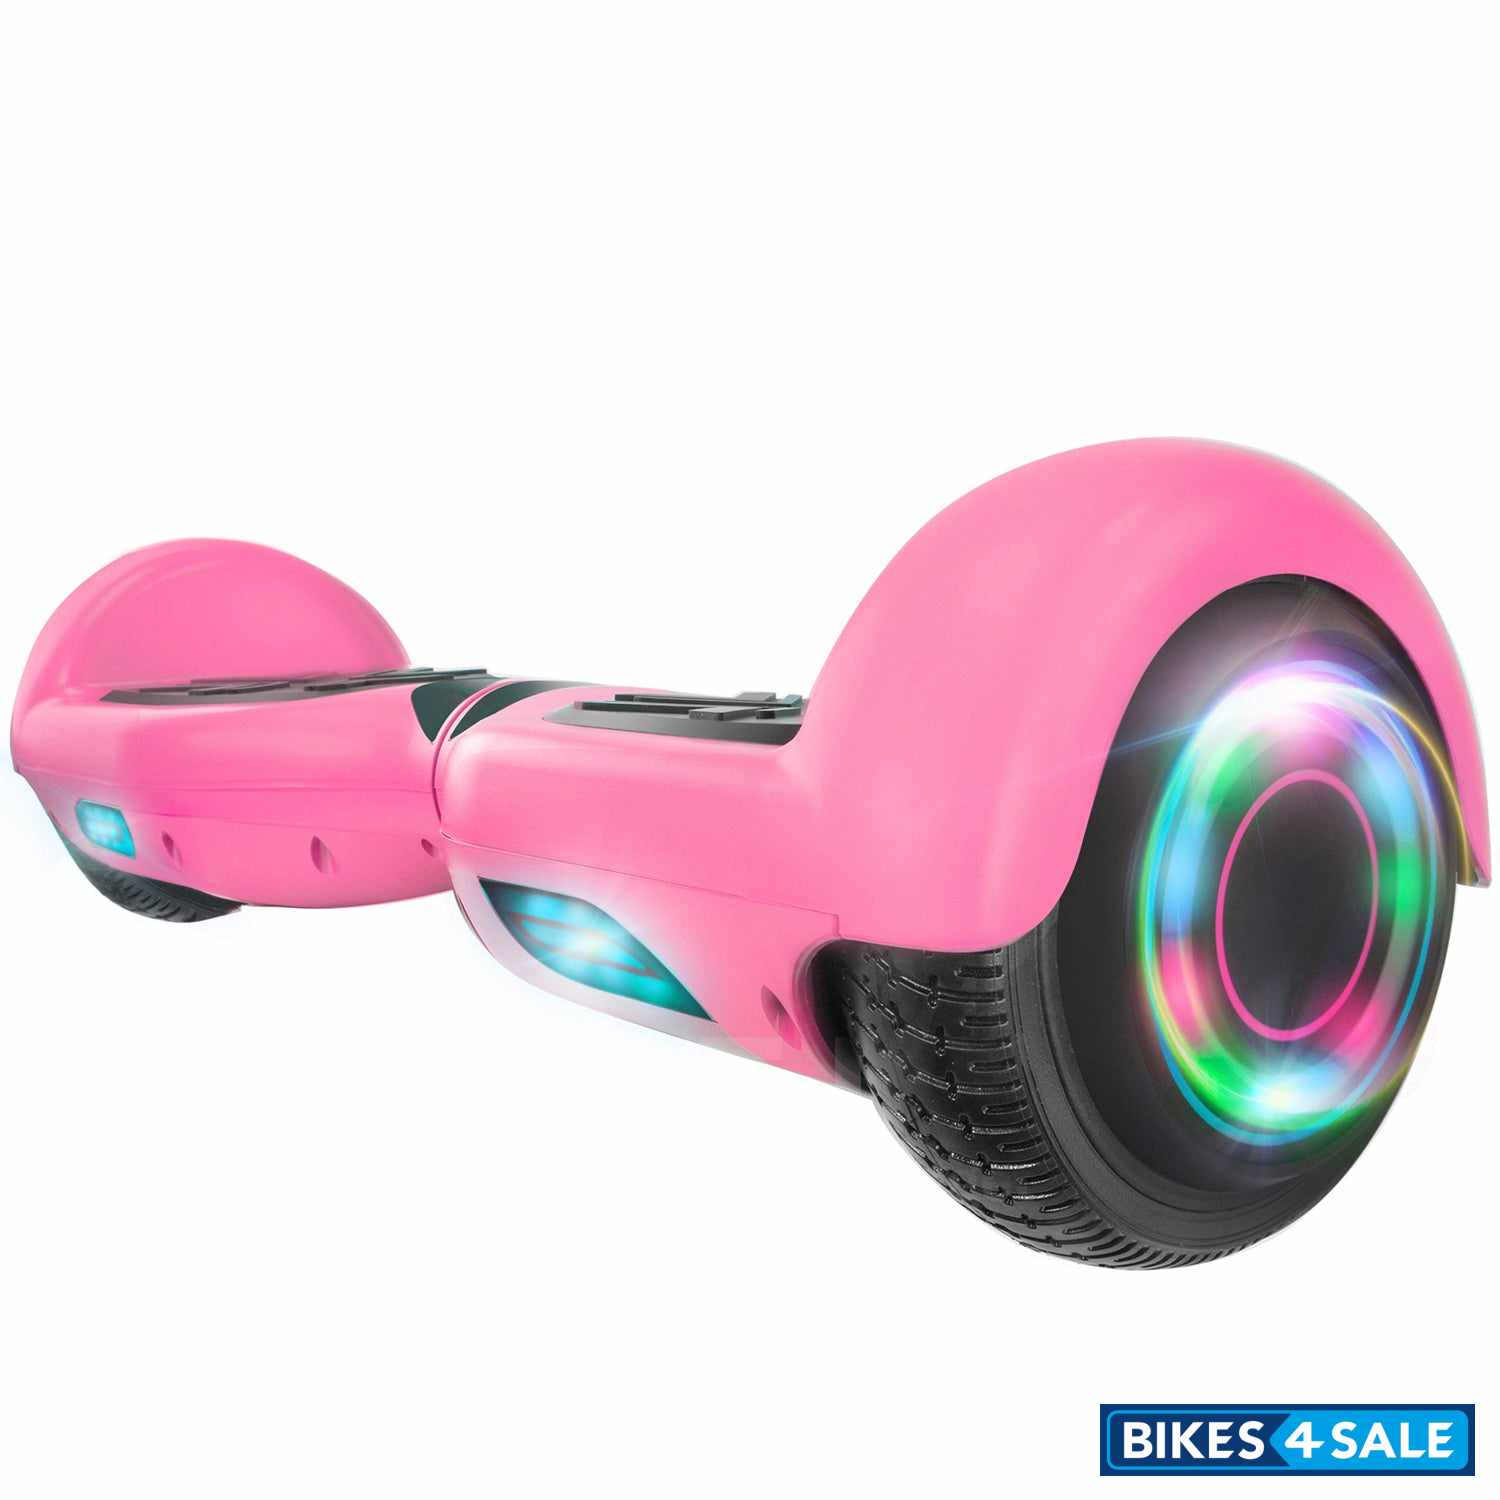 XPRIT 6.5 Classic Hoverboard - Pink